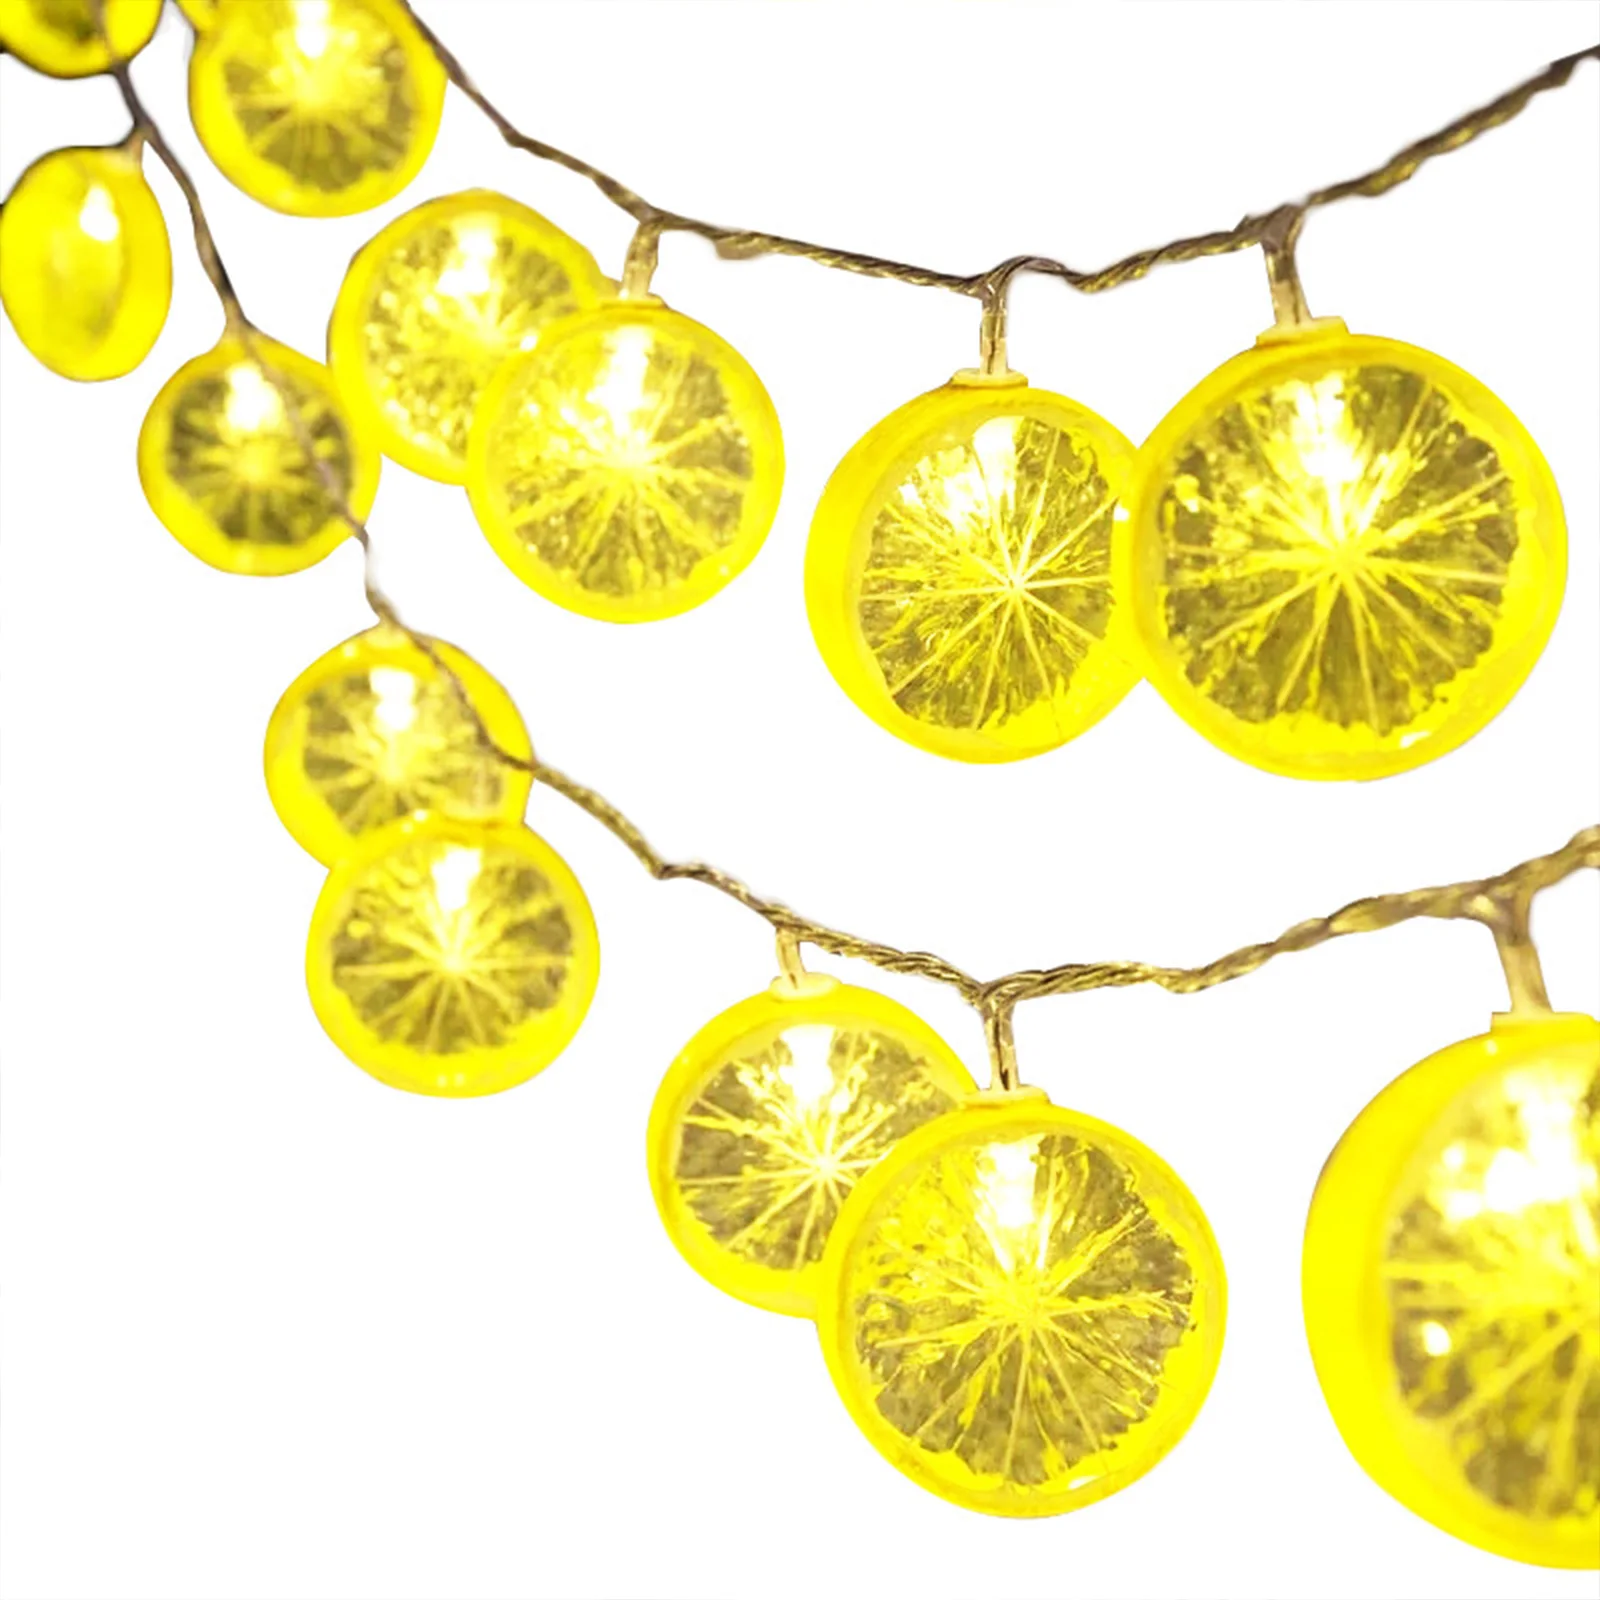 

USB Operated 20LEDs String Lights Artificial Lemon Slices Waterproof Fruit Lamp for Valentine's Day Wedding Party Garden Decor